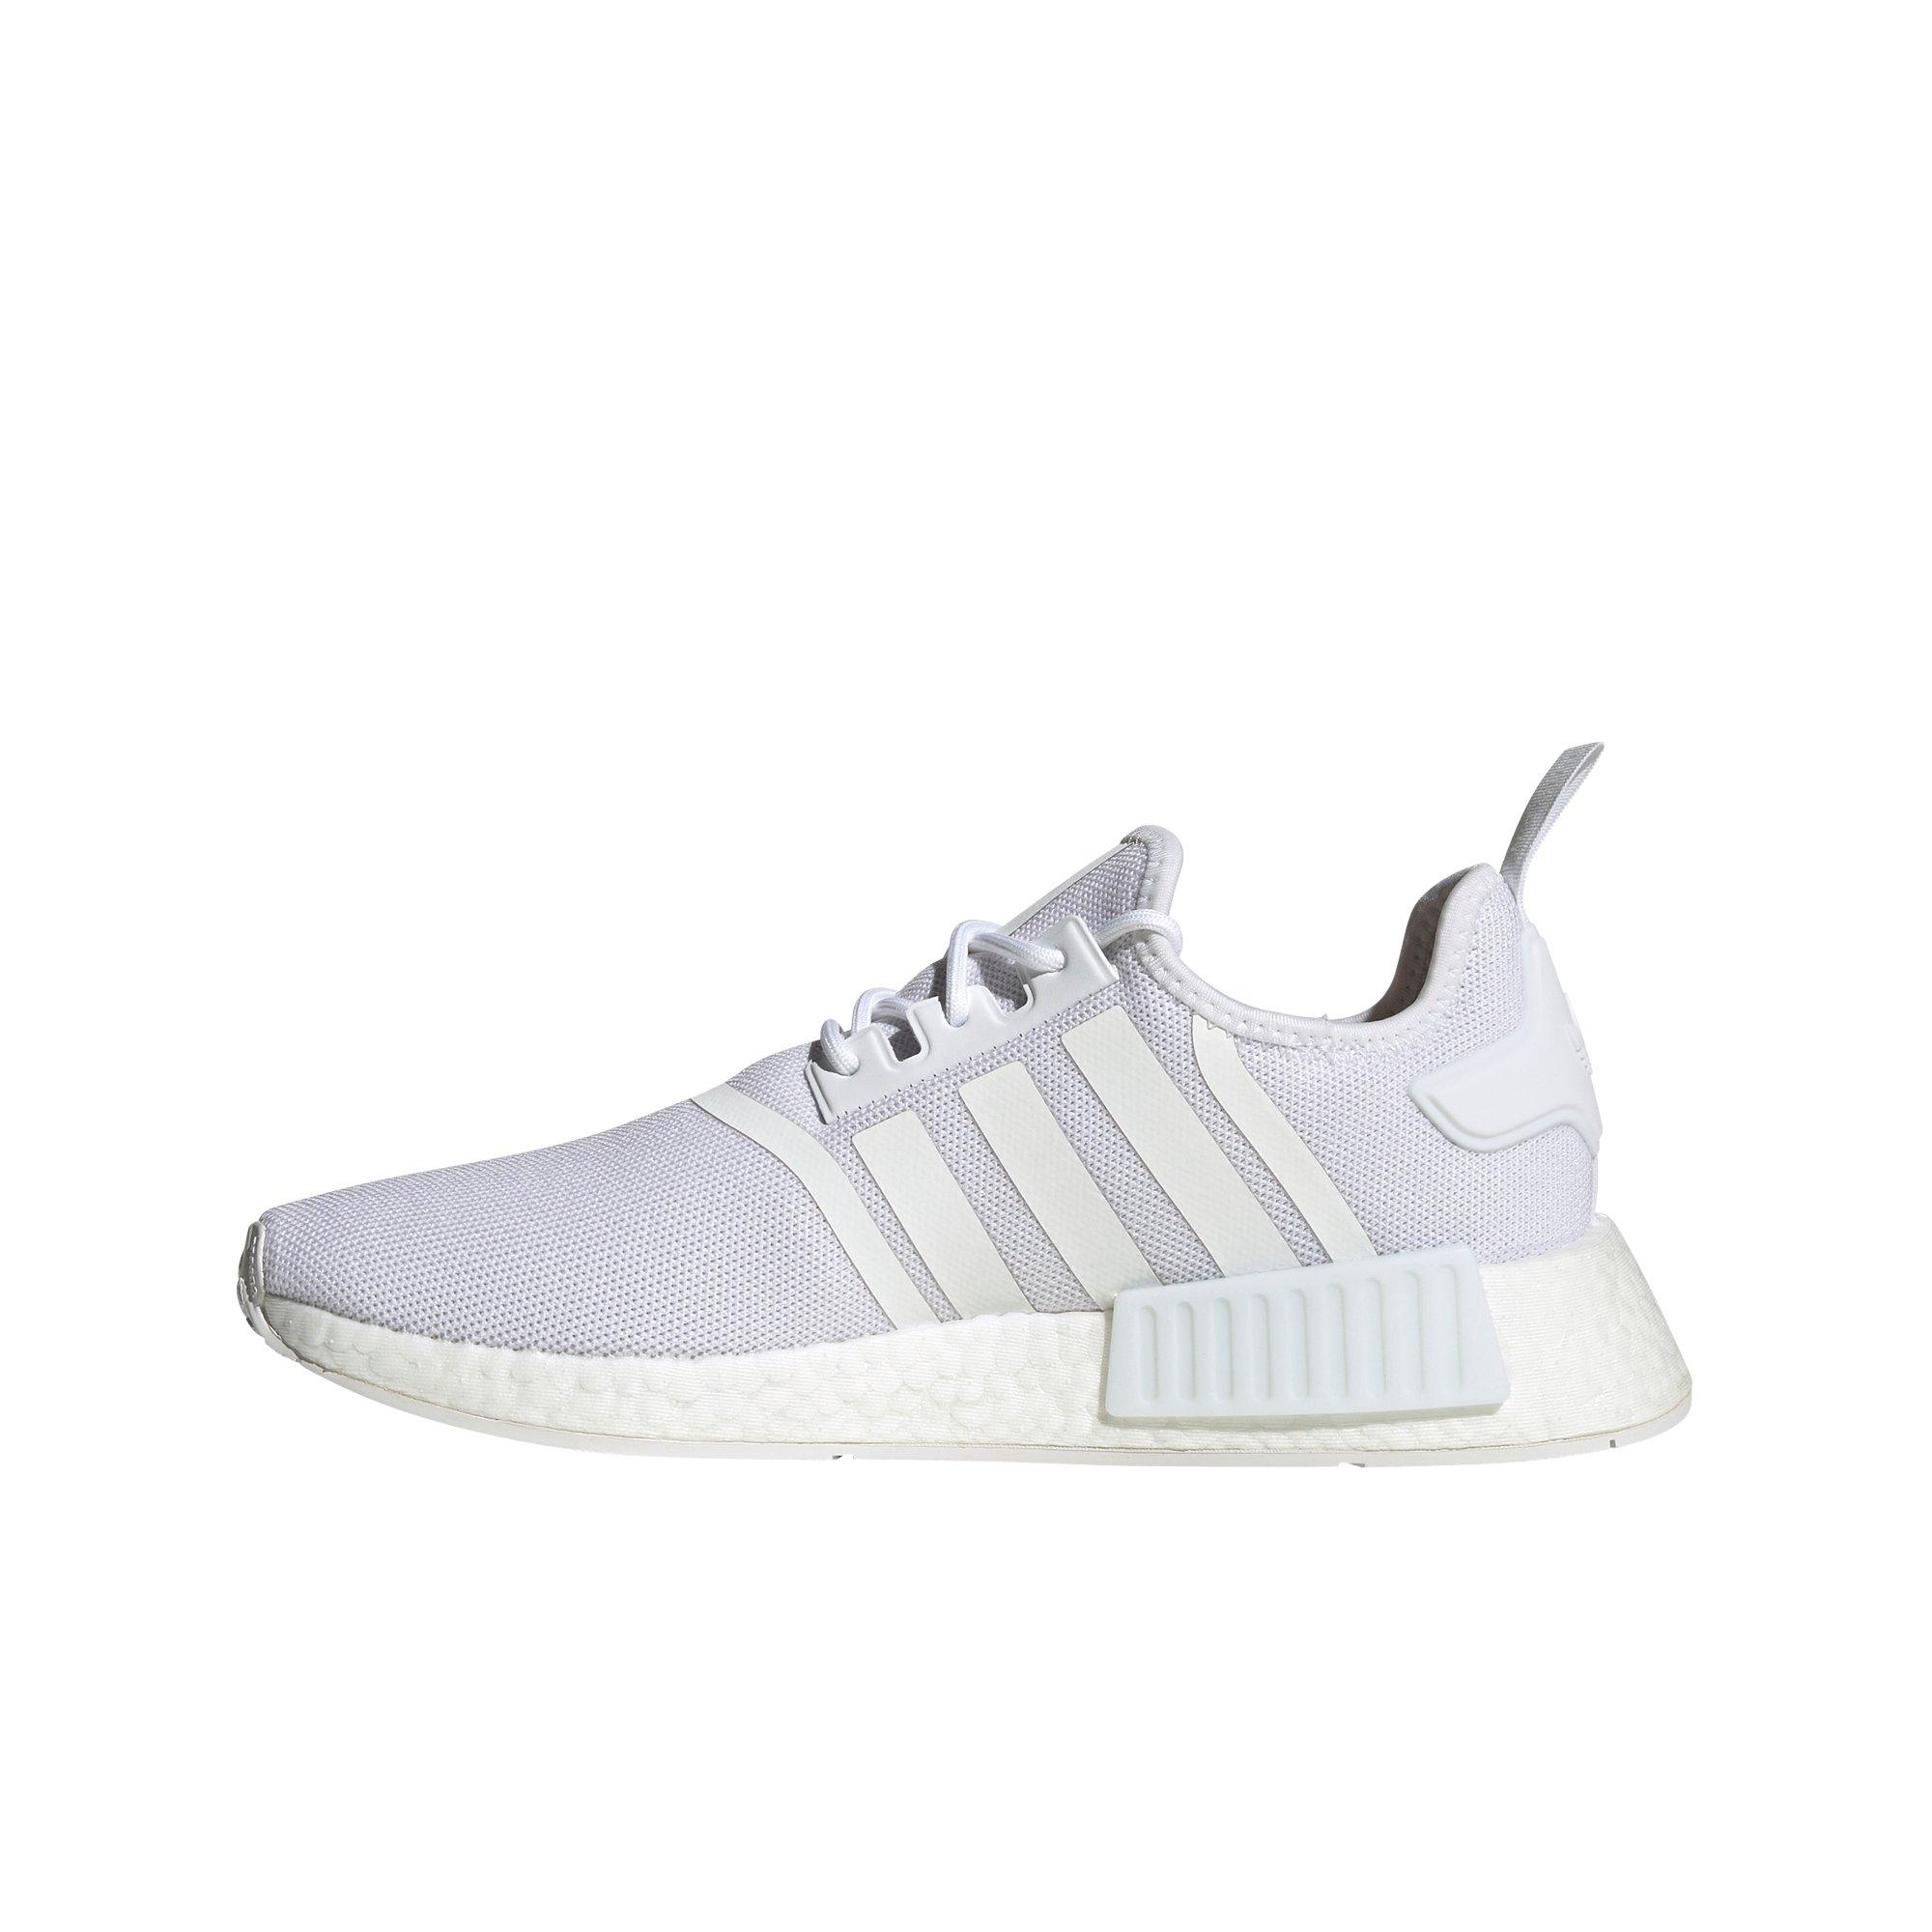 Adidas Men's NMD_R1 Primeblue Shoes - White - Size 8.5